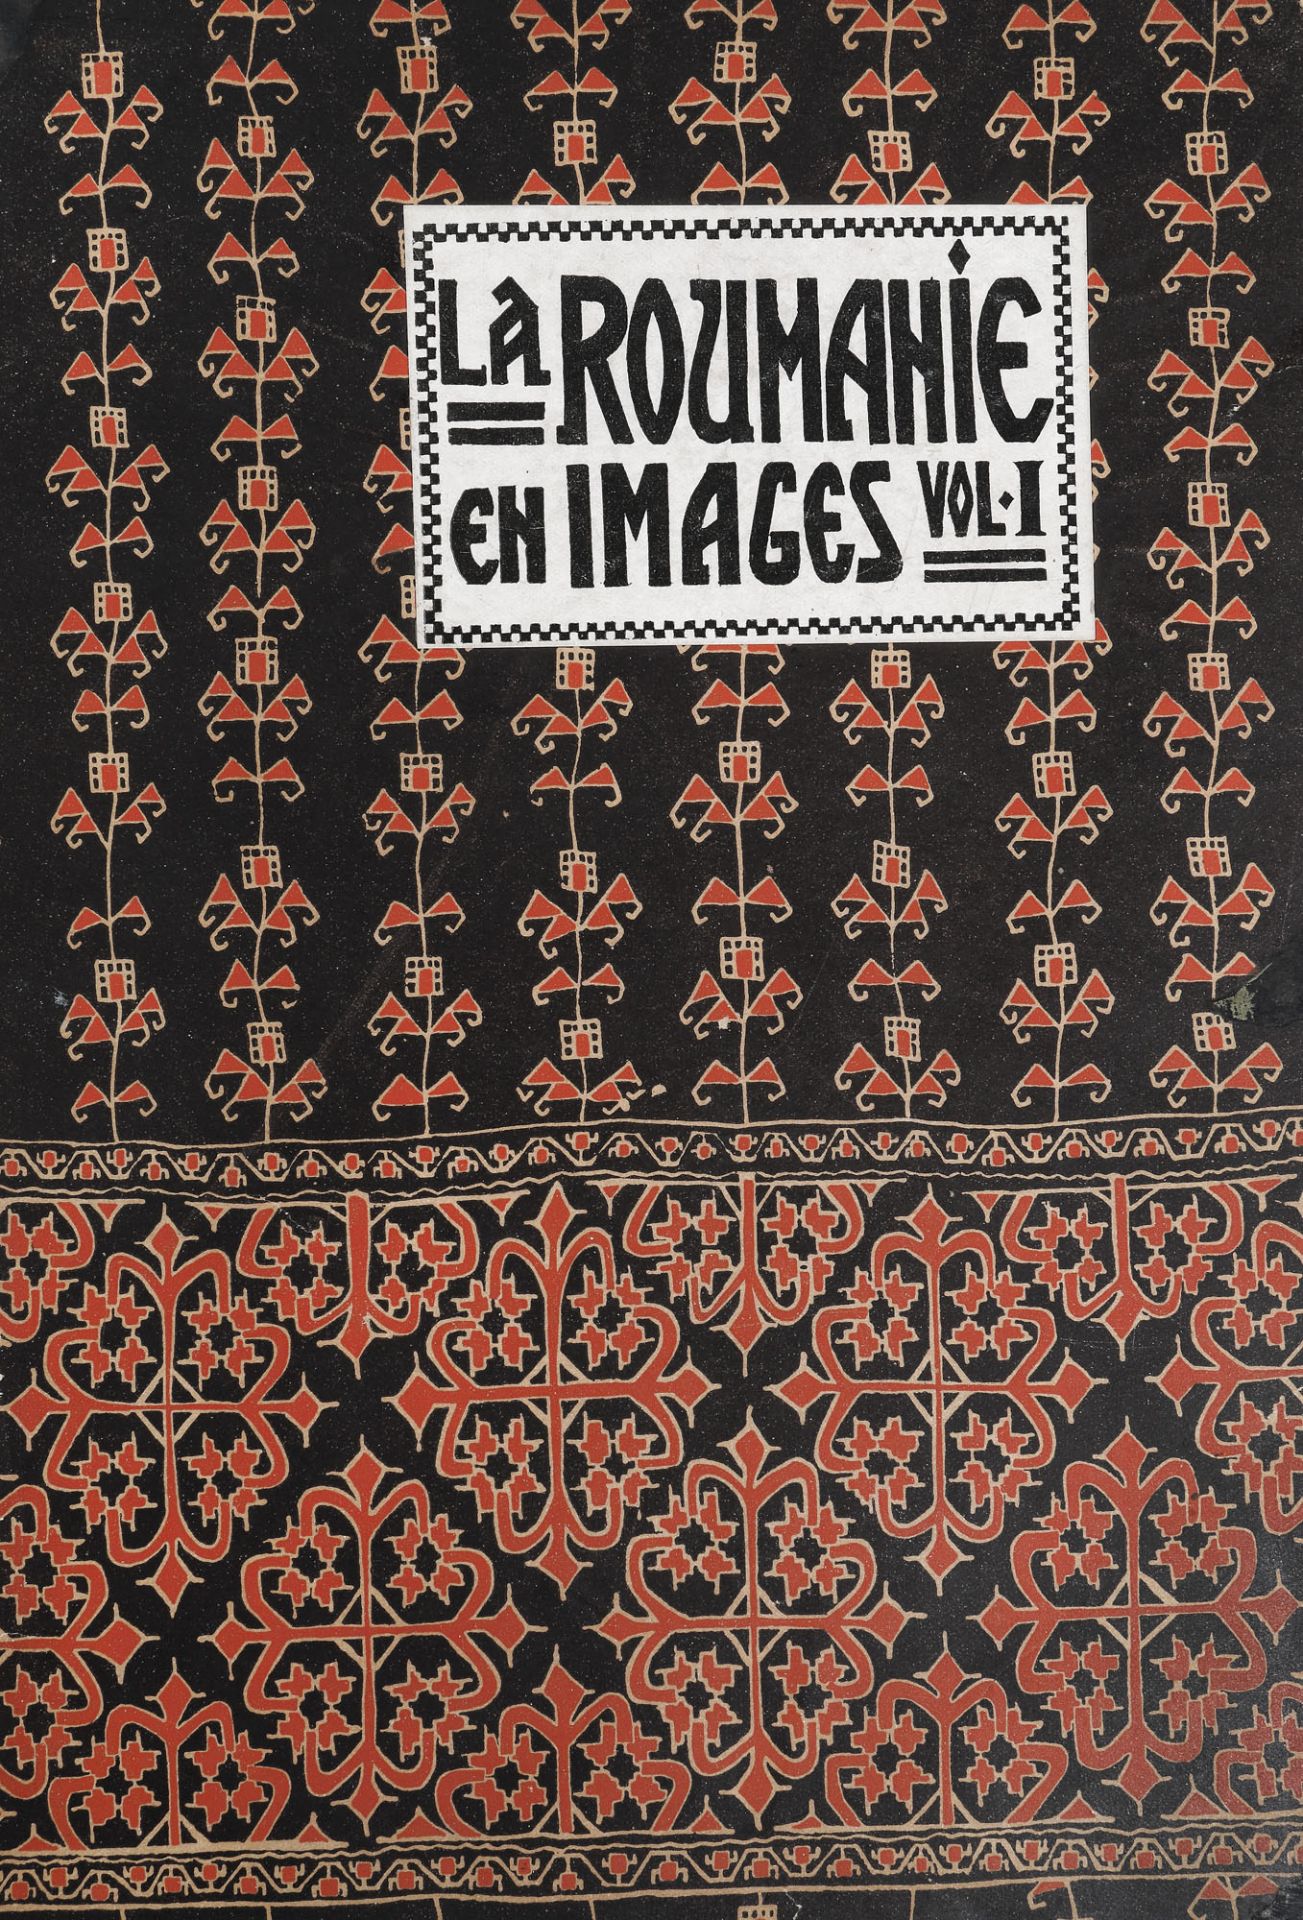 "România în imagini", by M.P.A., first volume, French, Paris, 1919, with the author's dedication to